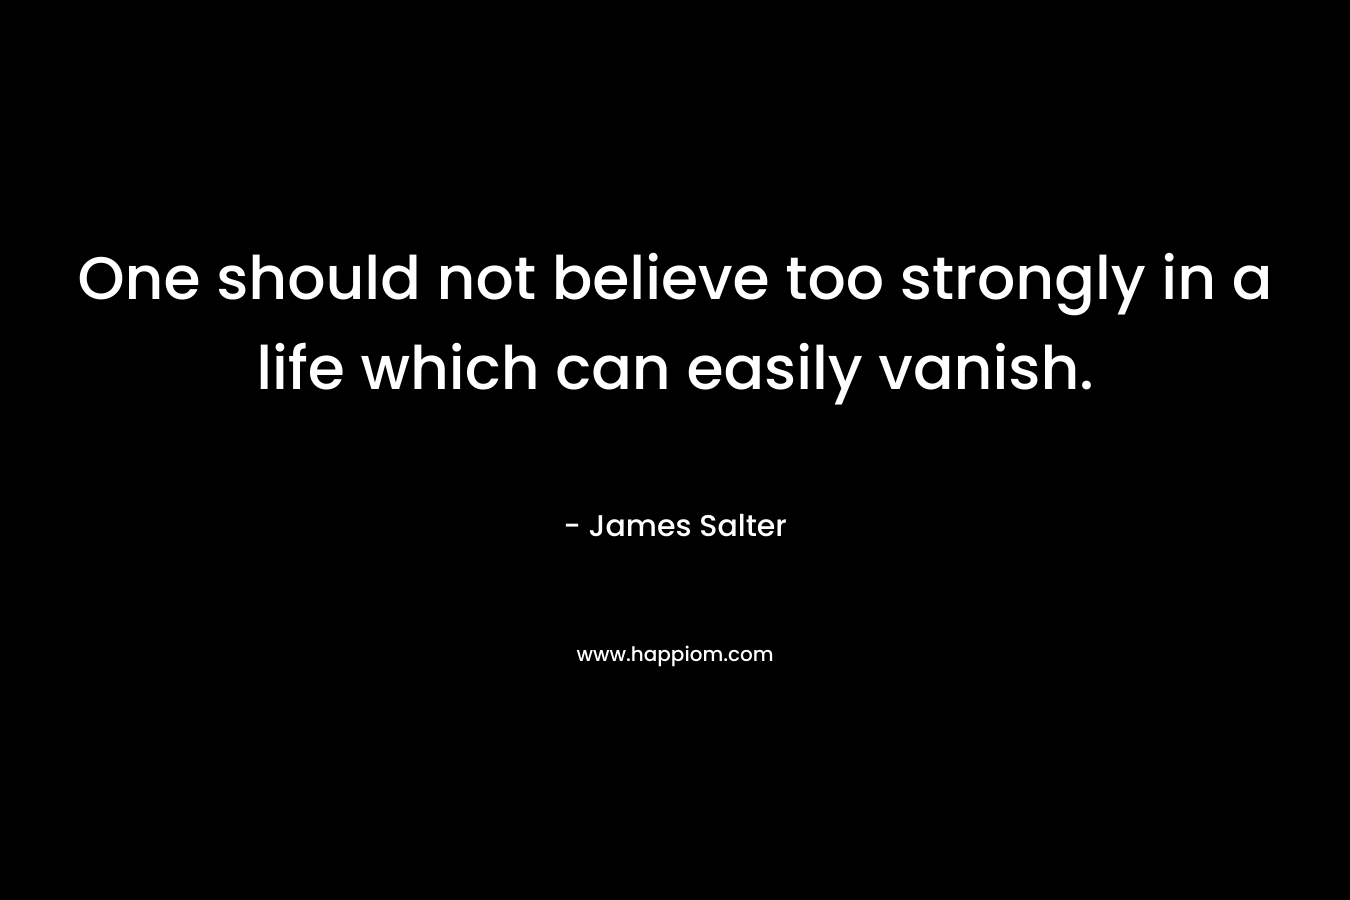 One should not believe too strongly in a life which can easily vanish.